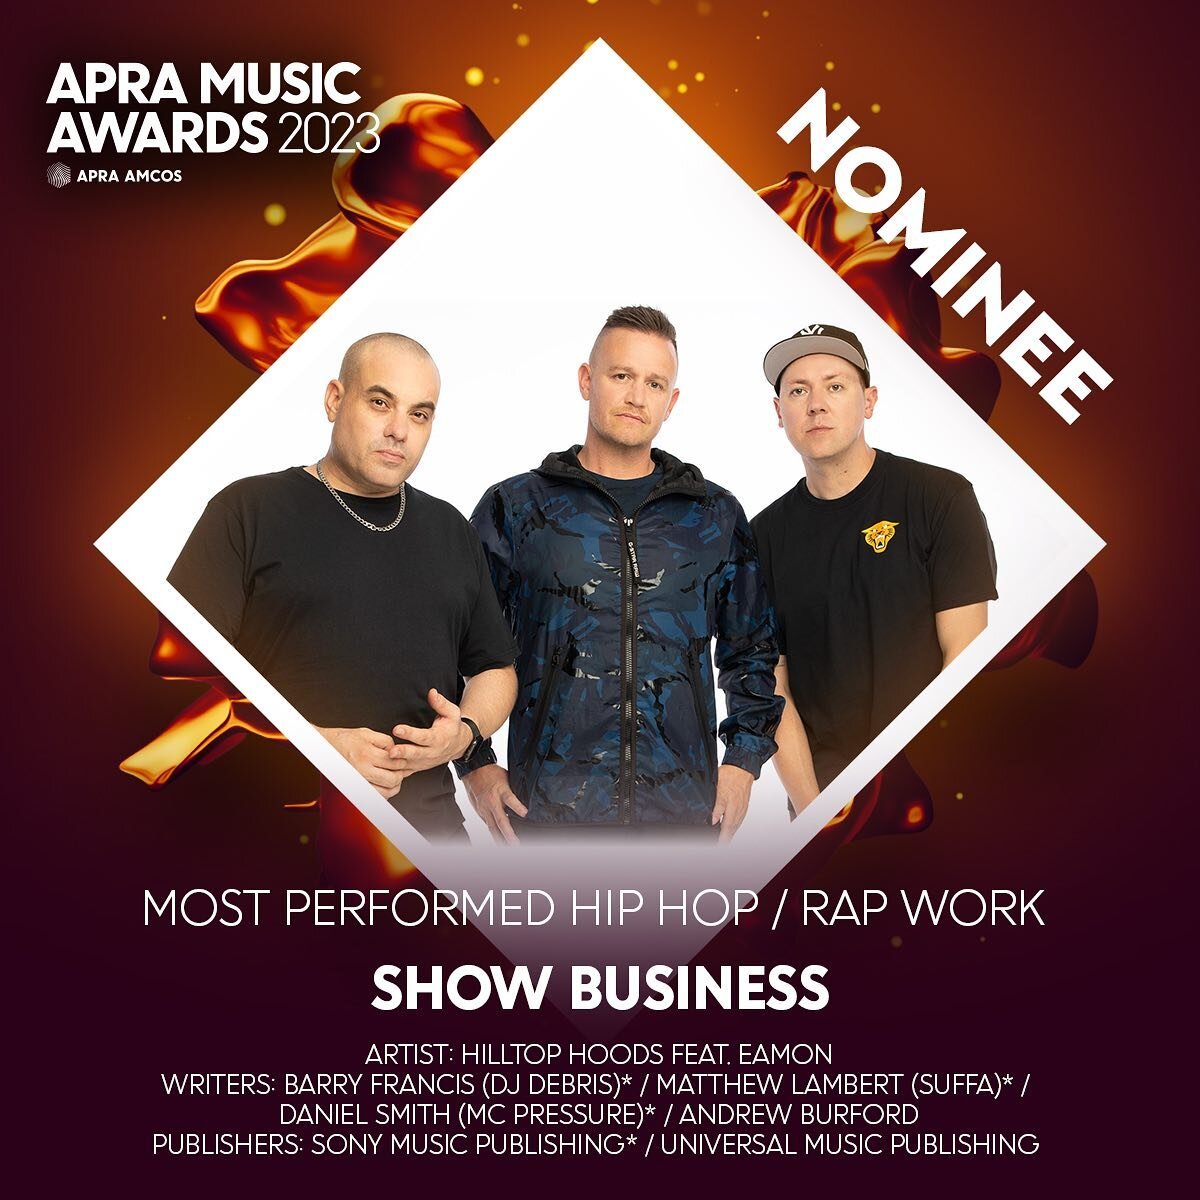 Ayo! Show Business is nominated for Most Performed Hip Hop Work at the APRA Awards. Congrats @hilltophoods @eamonofficial  Thanks @apraamcos